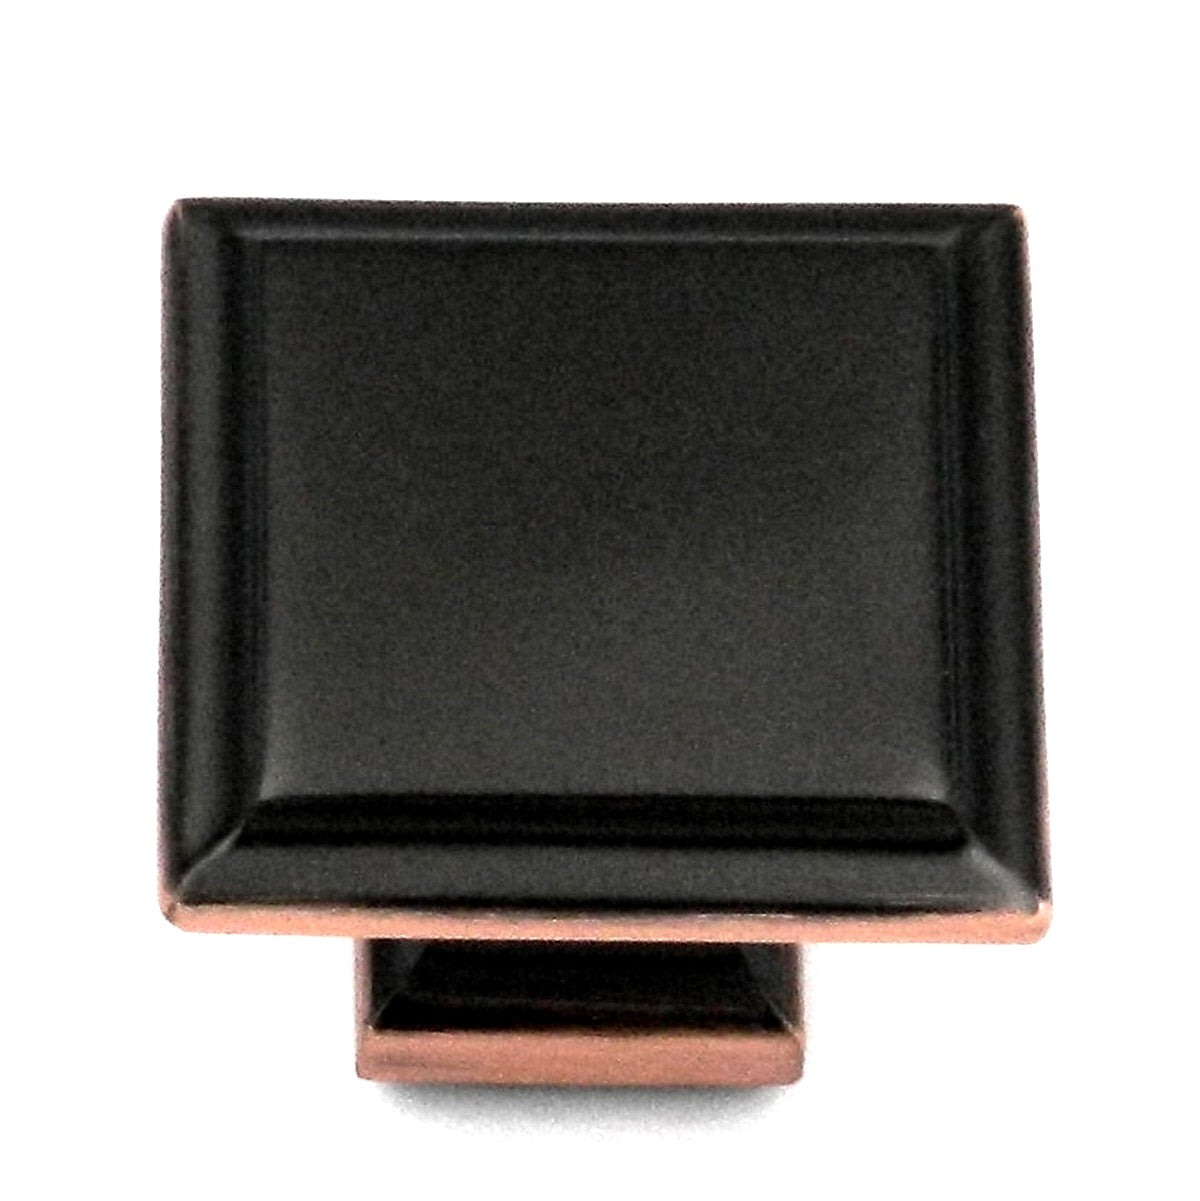 Belwith Keeler Studio II 1 1/4" Oil-Rubbed Bronze Highlighted Solid Brass Cabinet Knob P3270-2122